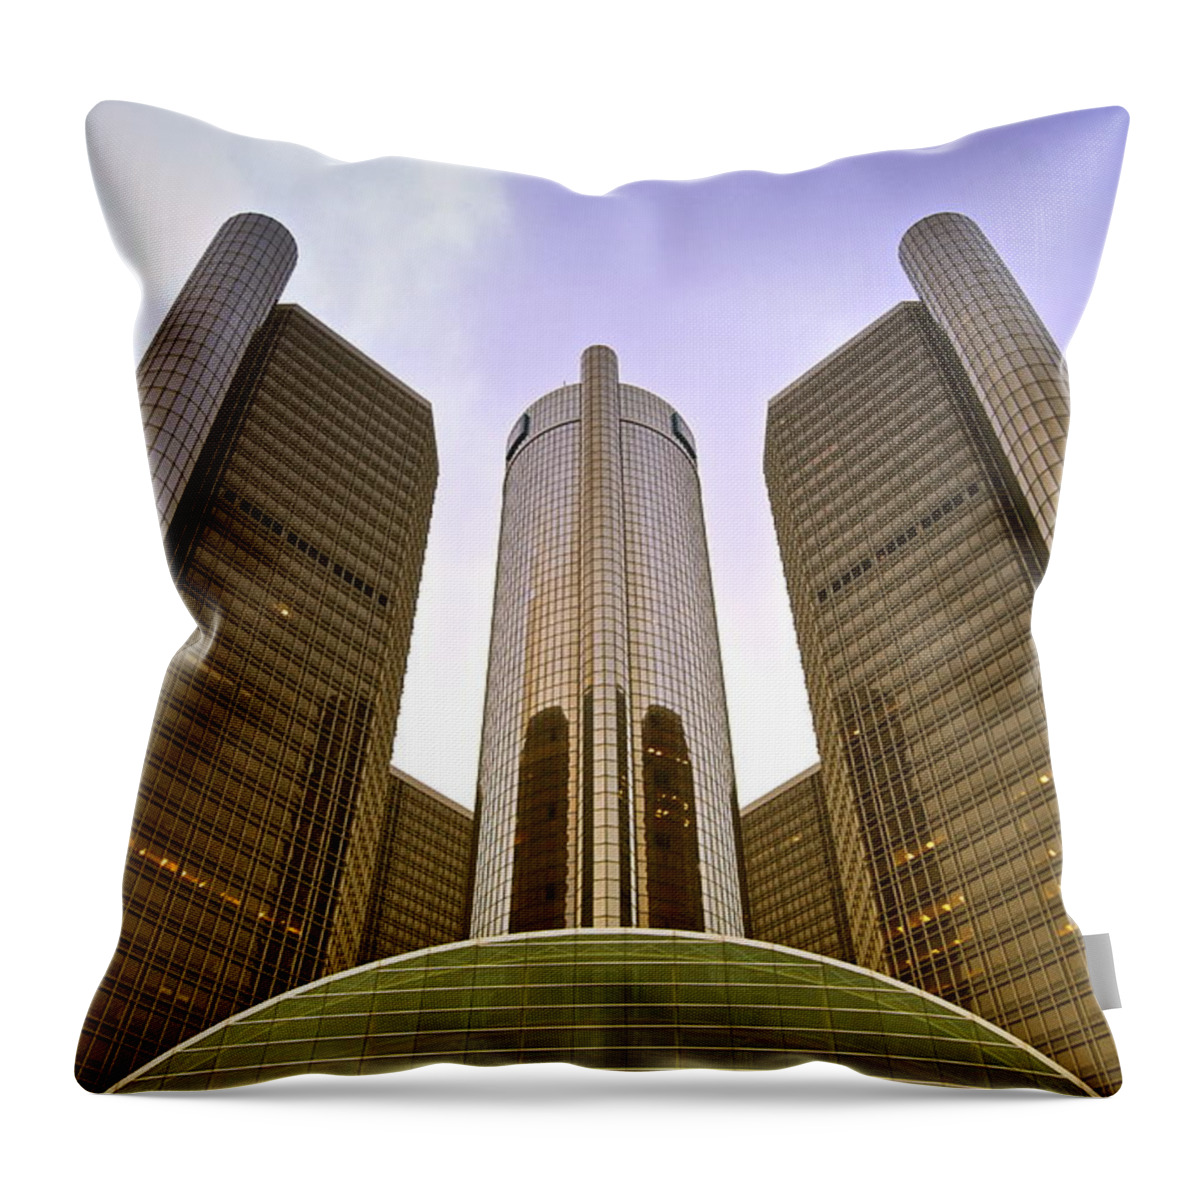 America Throw Pillow featuring the photograph Renaissance Center by Michael Peychich